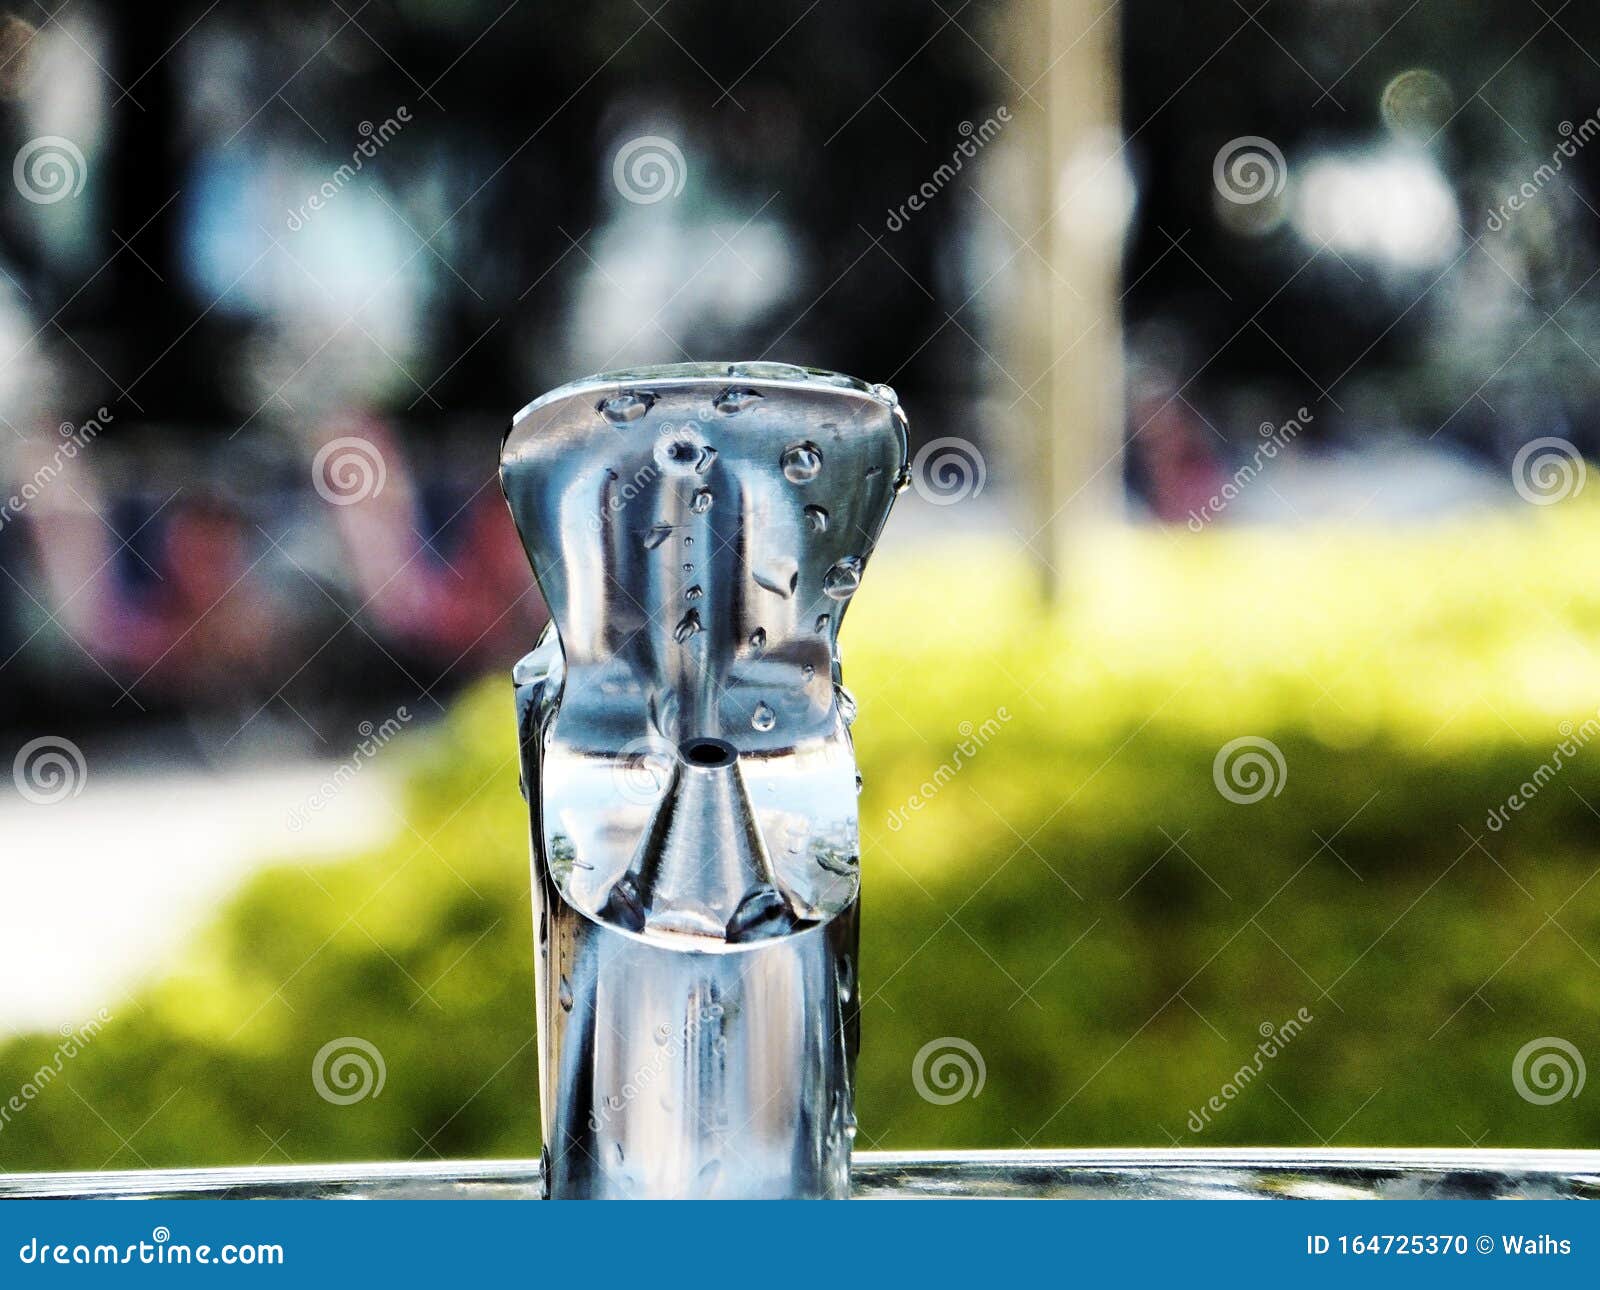 A Close Up Of A Stainless Steel Faucet Stock Photo Image Of